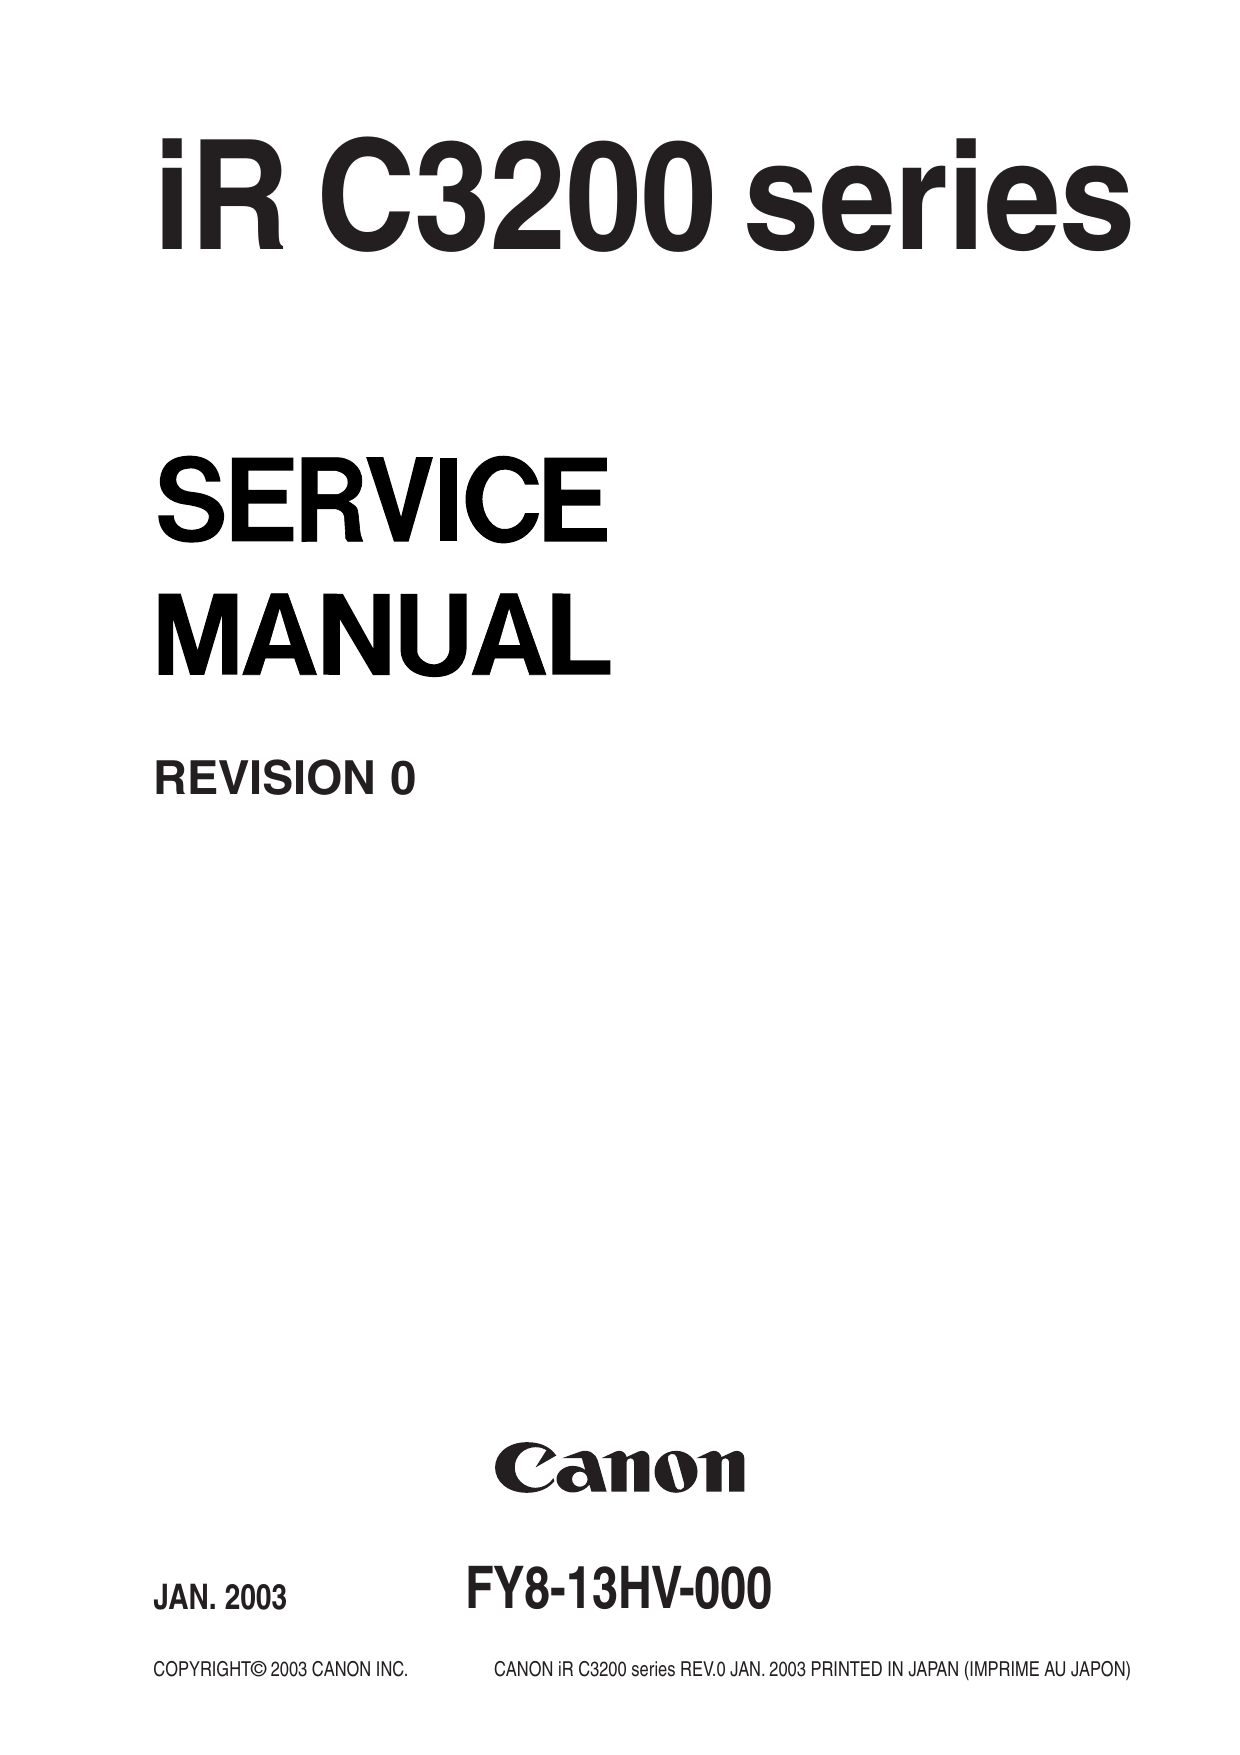 Canon iR C3200 series FY8-13HV-000 service manual Preview image 1